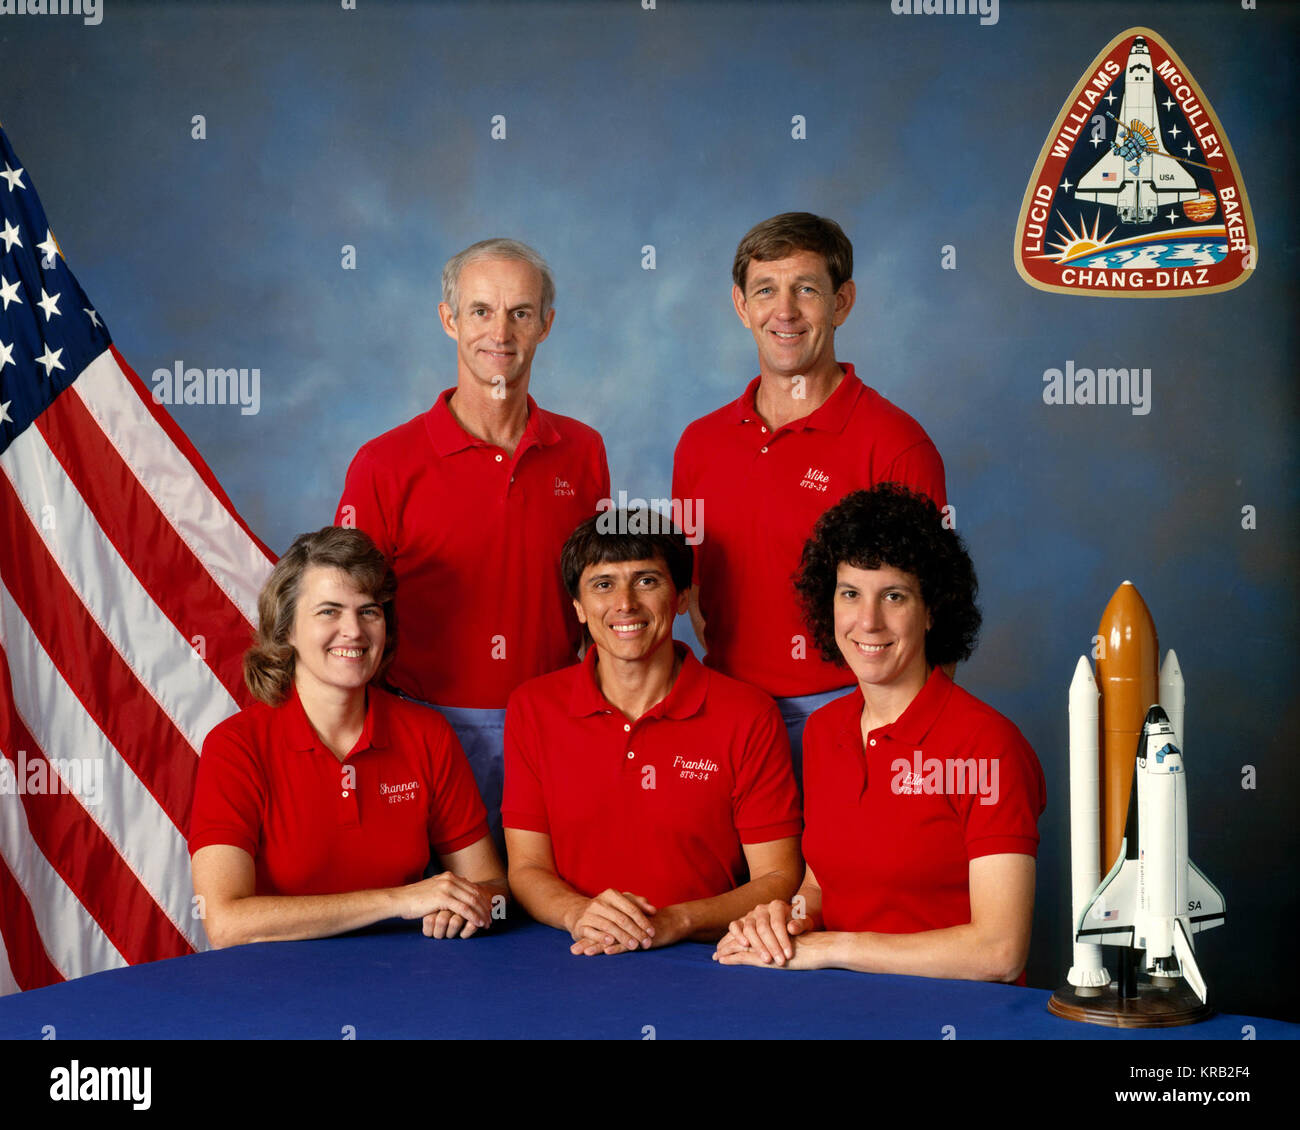 STS-34 Atlantis, OV-104, official crew portrait includes Commander Donald E. Williams, Pilot Michael J. McCulley, Mission Specialist (MS) Shannon W. Lucid, MS Ellen S. Baker, and MS Franklin R. Chang-Diaz wearing red mission t-shirts. Seated (left to right) are Lucid, Chang-Diaz, and Baker with Williams (left) and McCulley standing. Crew patch or emblem is displayed in the background. Sts-34 crew Stock Photo